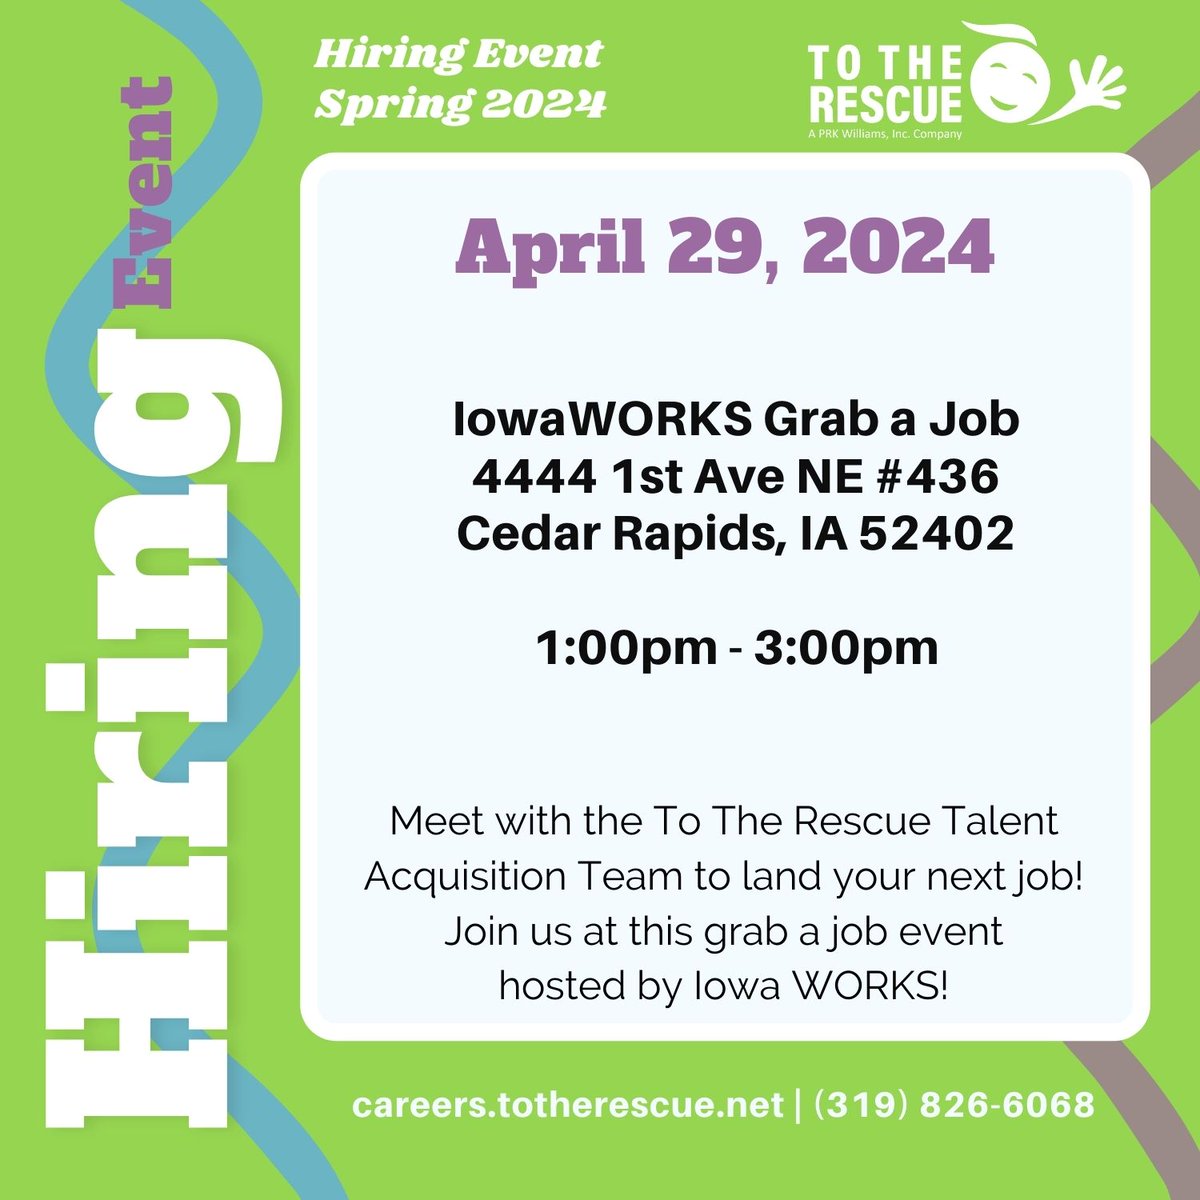 Plan to attend our Grab-a-Job event this Monday, April 29th! To The Rescue talent acquisition staff will be on-site ready to talk to you about your next career opportunities! @IowaWORKSGrabAJob

#ToTheRescue #IowaWORKSGrabAJob #WeAreHiring